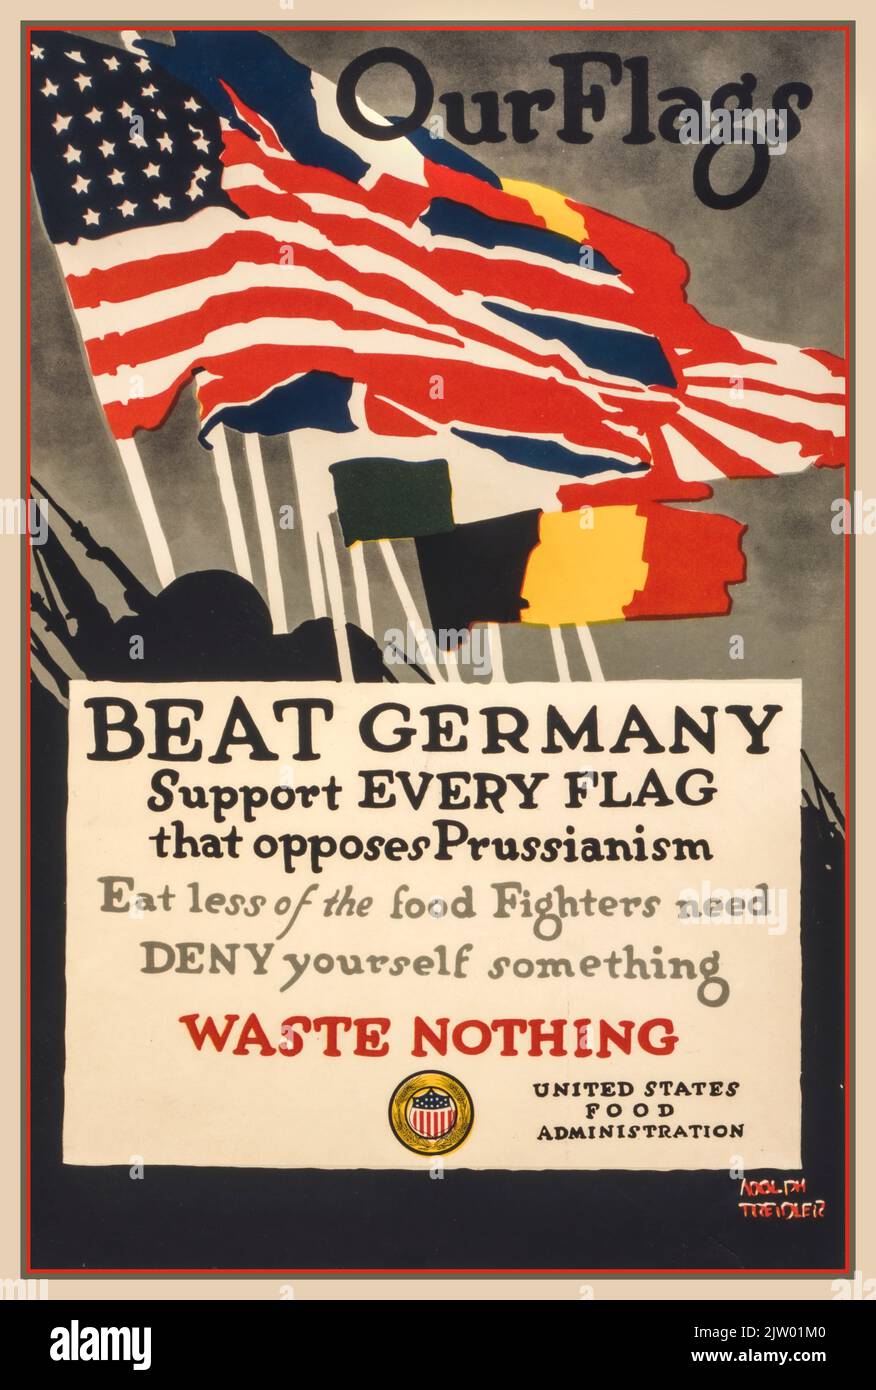 WW1 American Propaganda Poster: 'Our flags--Beat Germany Support EVERY FLAG that opposes Prussianism' Poster showing the American and other Allied flags. lithograph,  Artist Adolph Treidler ; Edwards & Deutsch Litho. Co. Chicago.; United States Food Administration. Date 1918 First World War WW1 The Great War Stock Photo